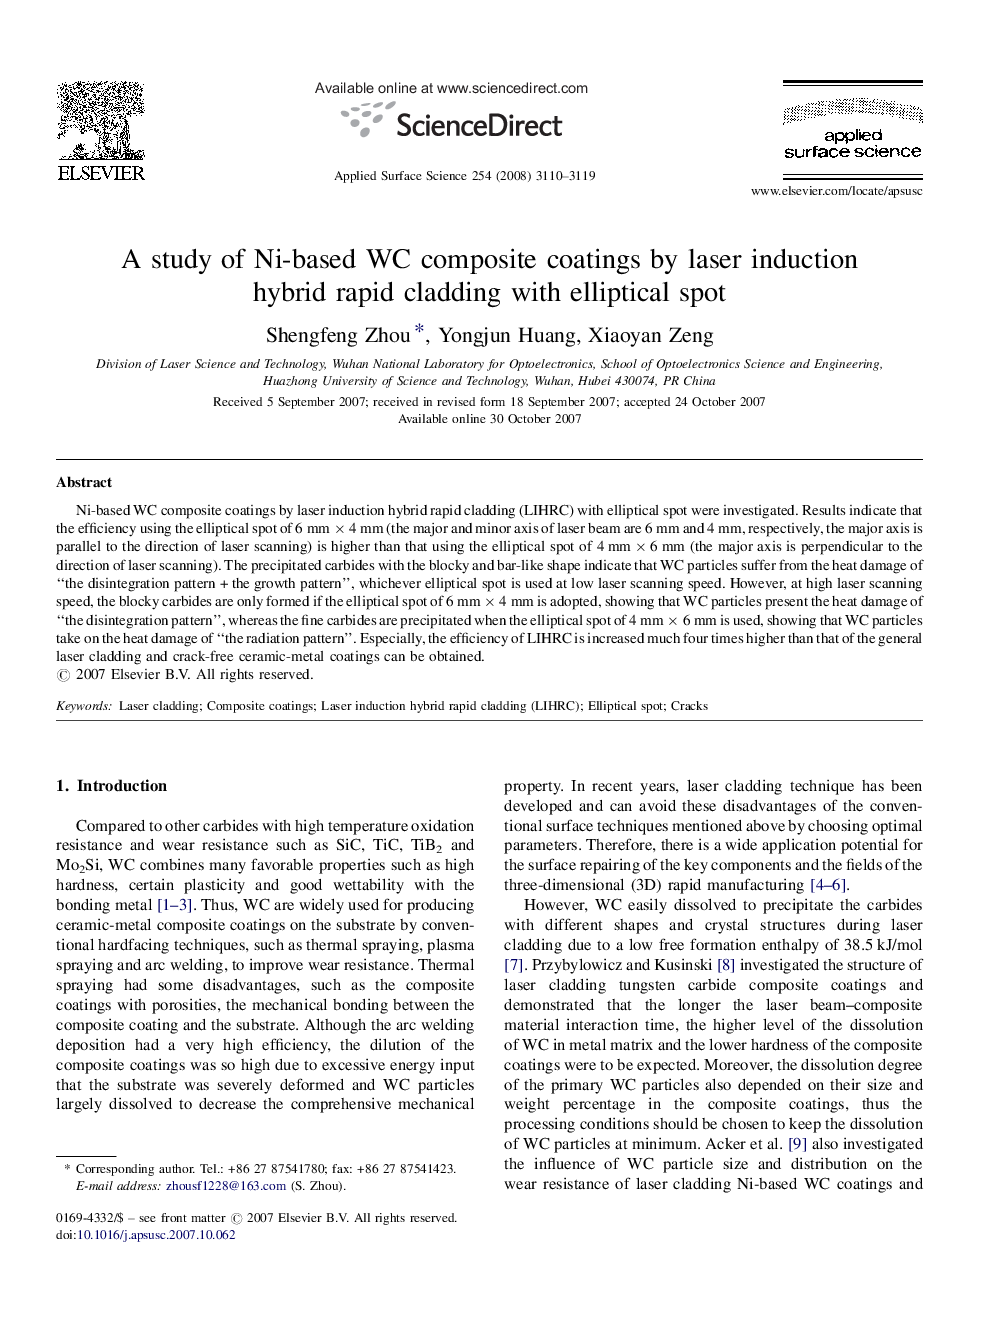 A study of Ni-based WC composite coatings by laser induction hybrid rapid cladding with elliptical spot